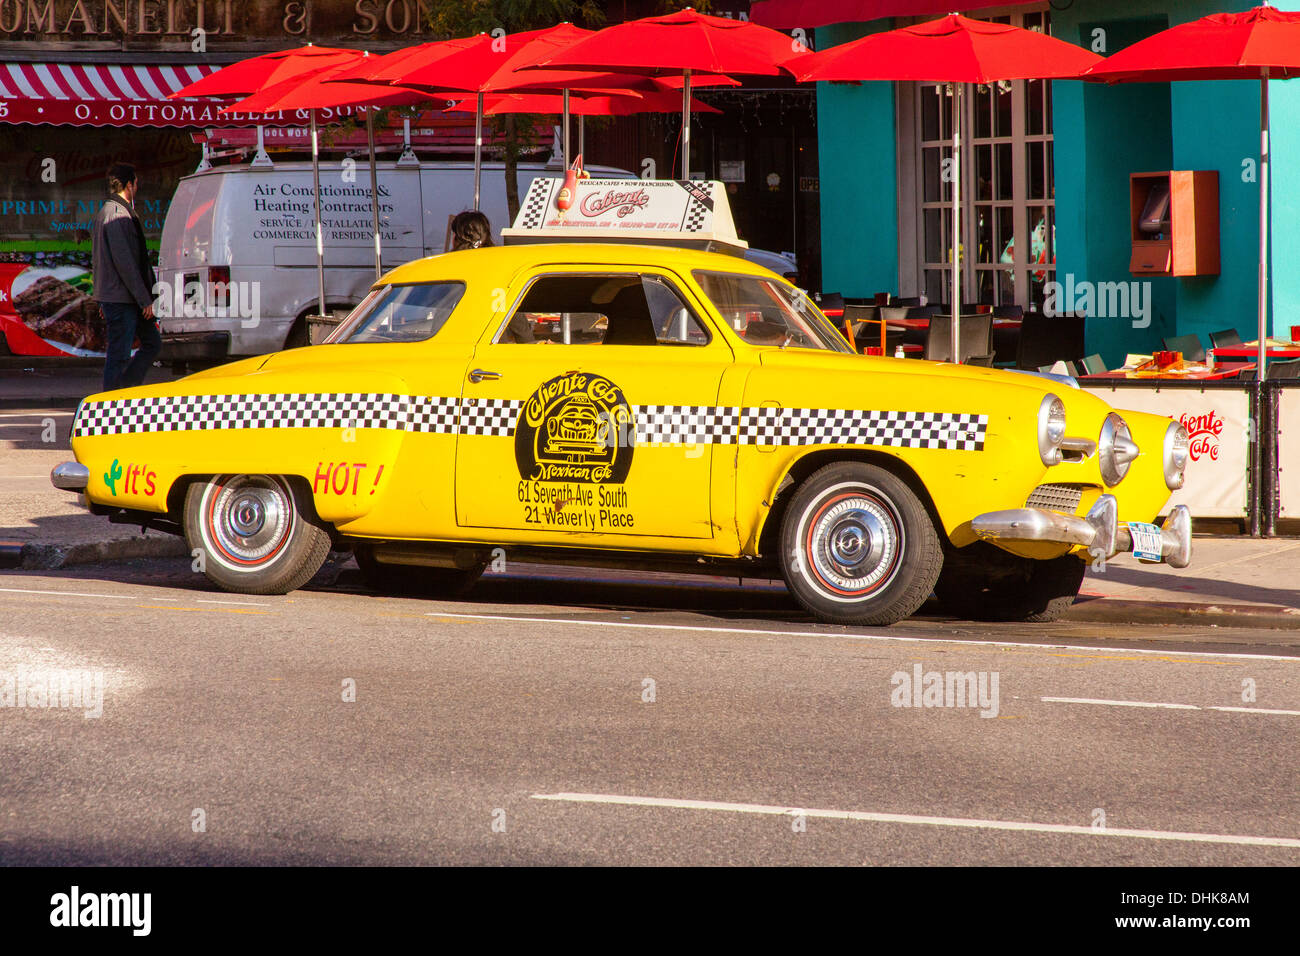 Vintage yellow taxi cab (1950's Studebaker) outside the Caliente Mexican restaurant, Greenwich Village, New York City, U.S.A Stock Photo